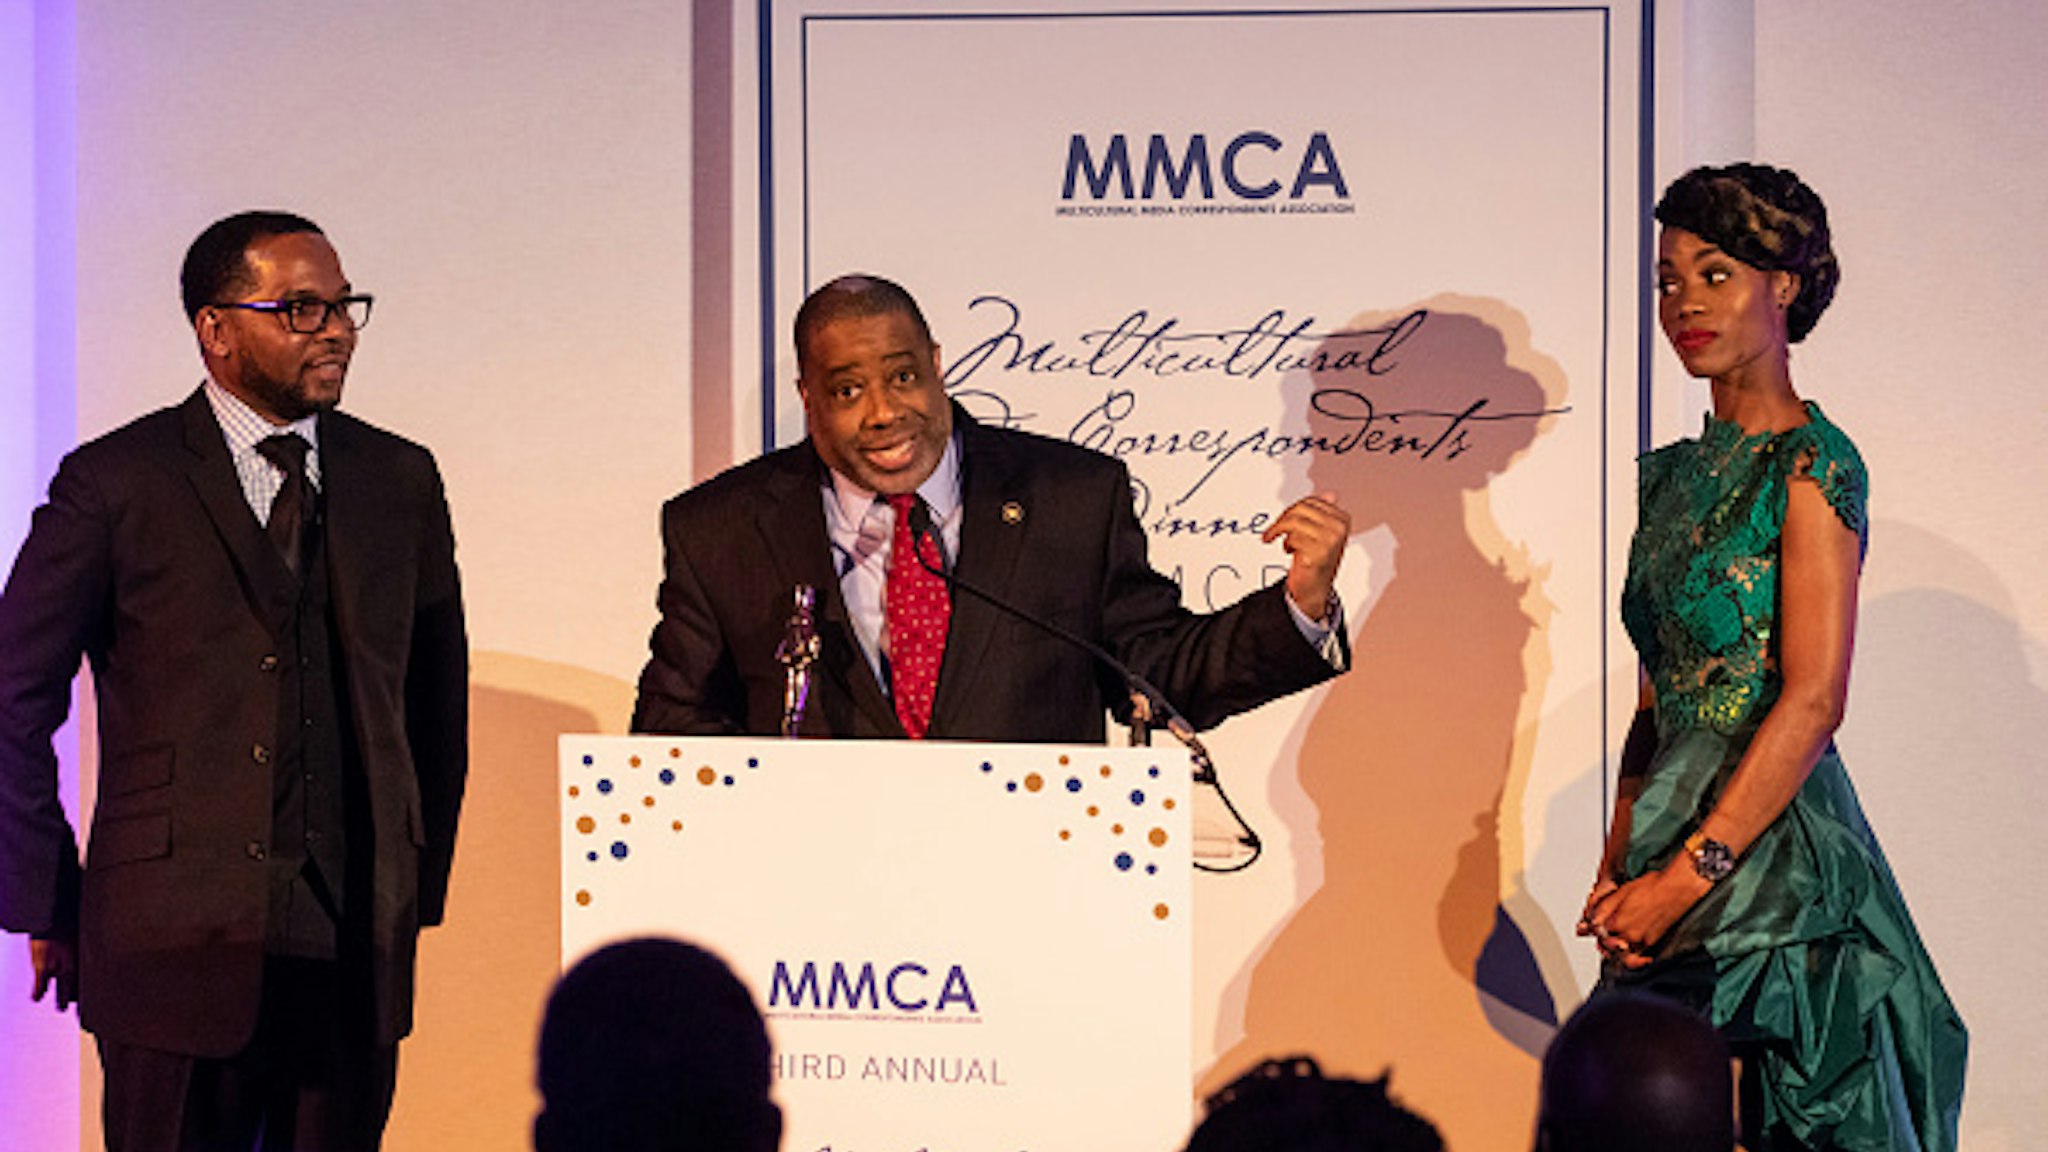 Fifth Estate, New Media Journalist of the Year honoree: Raynard Jackson (center), Syndicated Columnist for NNPA, accepts his award, recognizing his friends (L-R): Carvin Haggins, Grammy award winning songwriter/producer, and singer Algebra Blessett, at the Third Annual Multicultural Media Correspondents Dinner at the National Press Club in Washington, D.C. on Thursday, May 24, 2018.